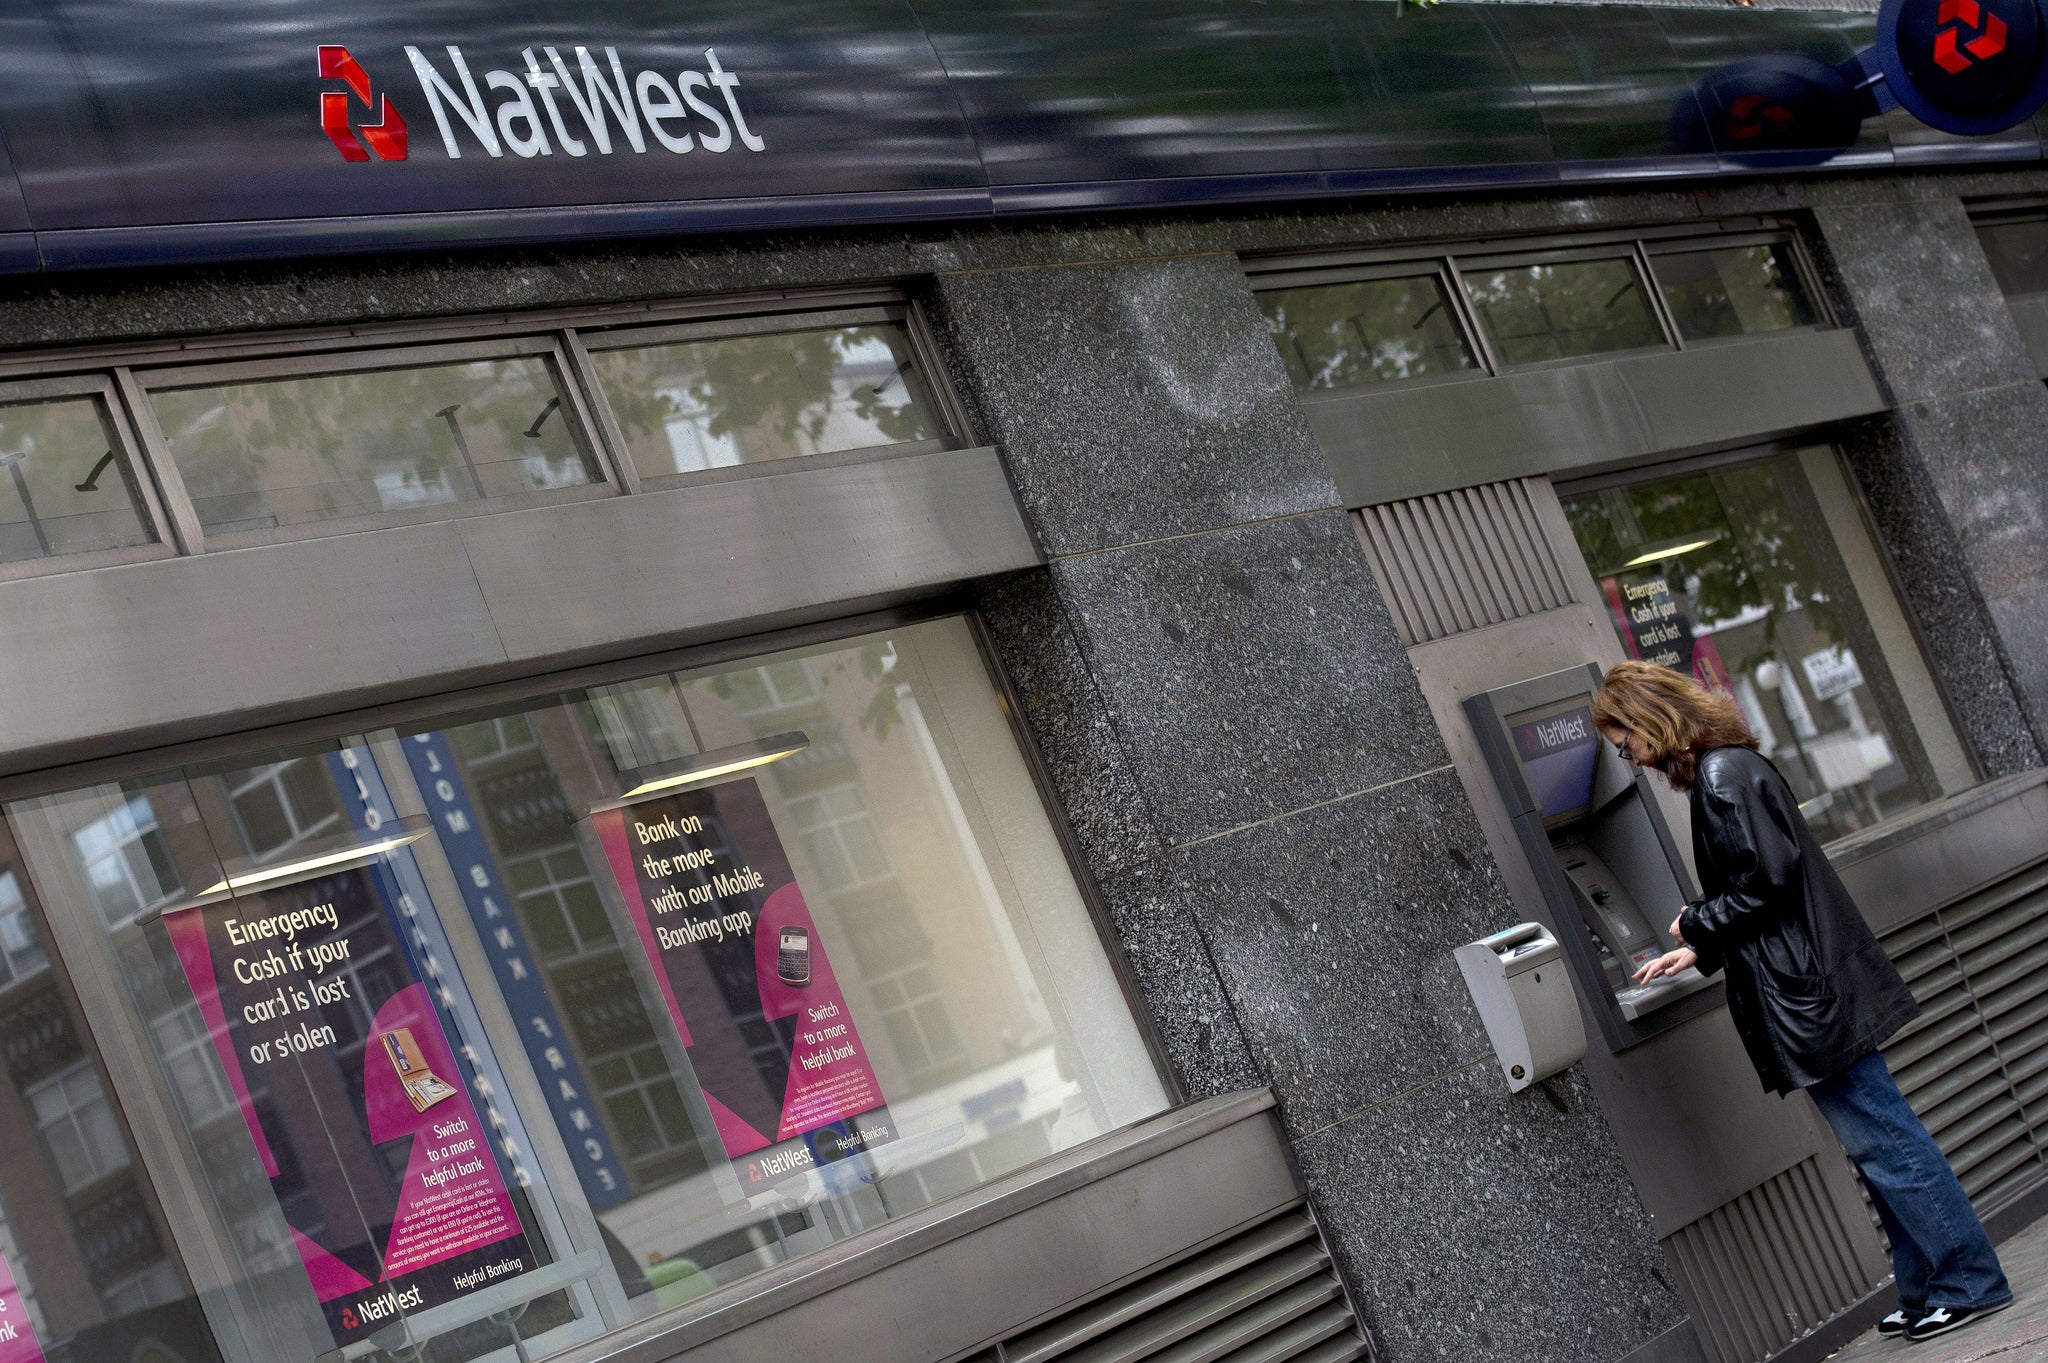 NatWest customers complained on Twitter that they were unable to withdraw cash